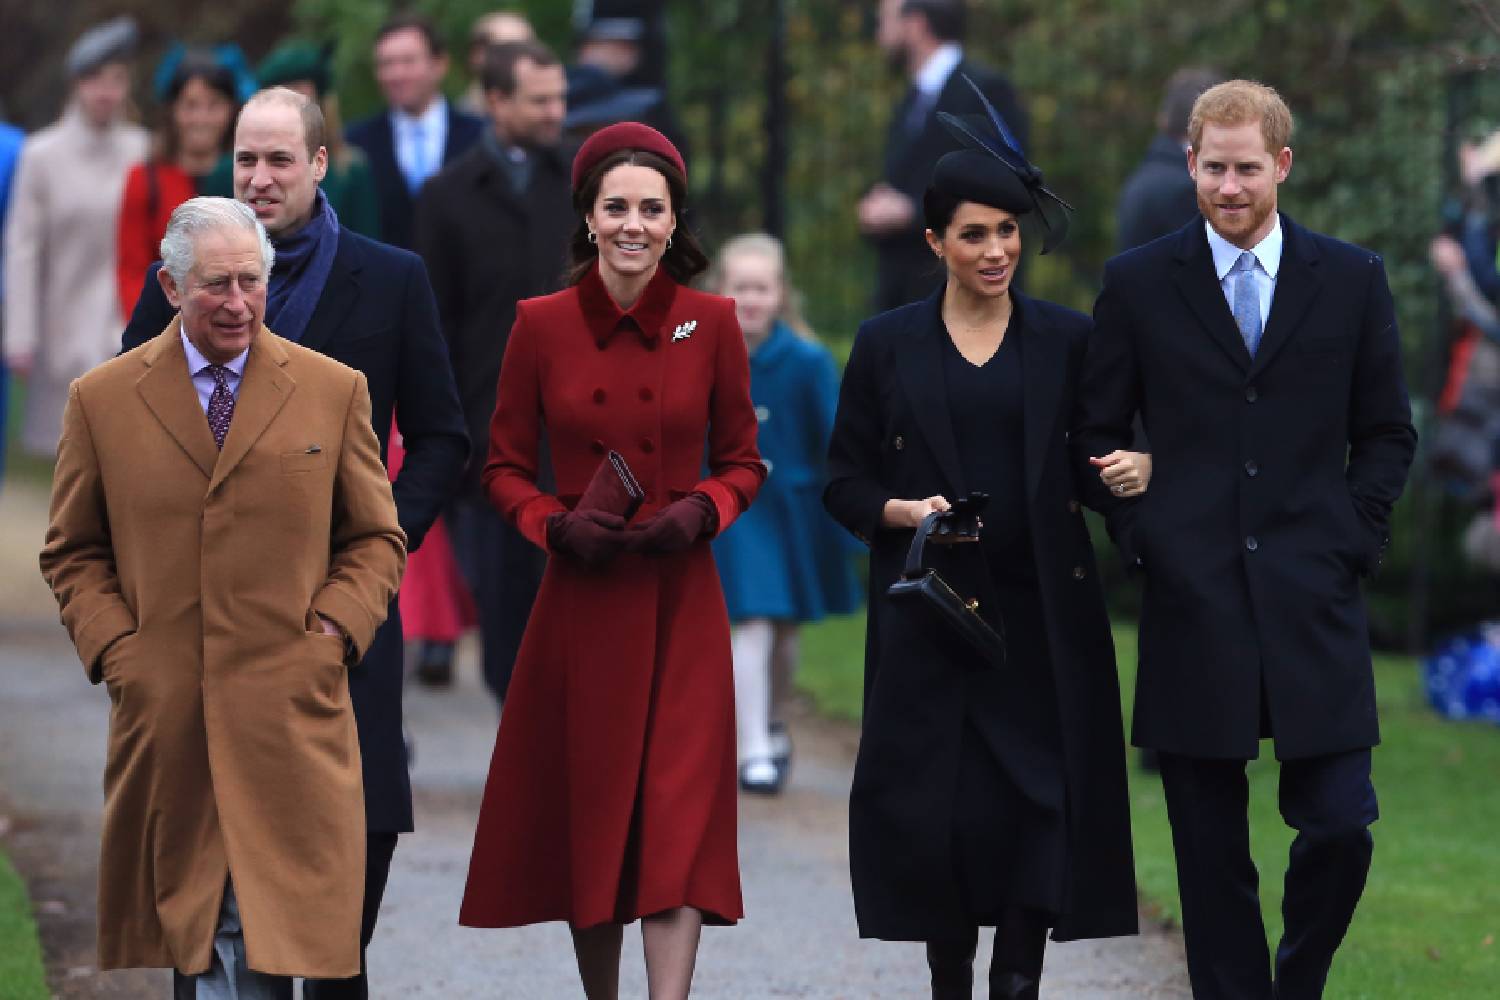 The Defining Elements Of British Quiet Luxury, According To The Royals